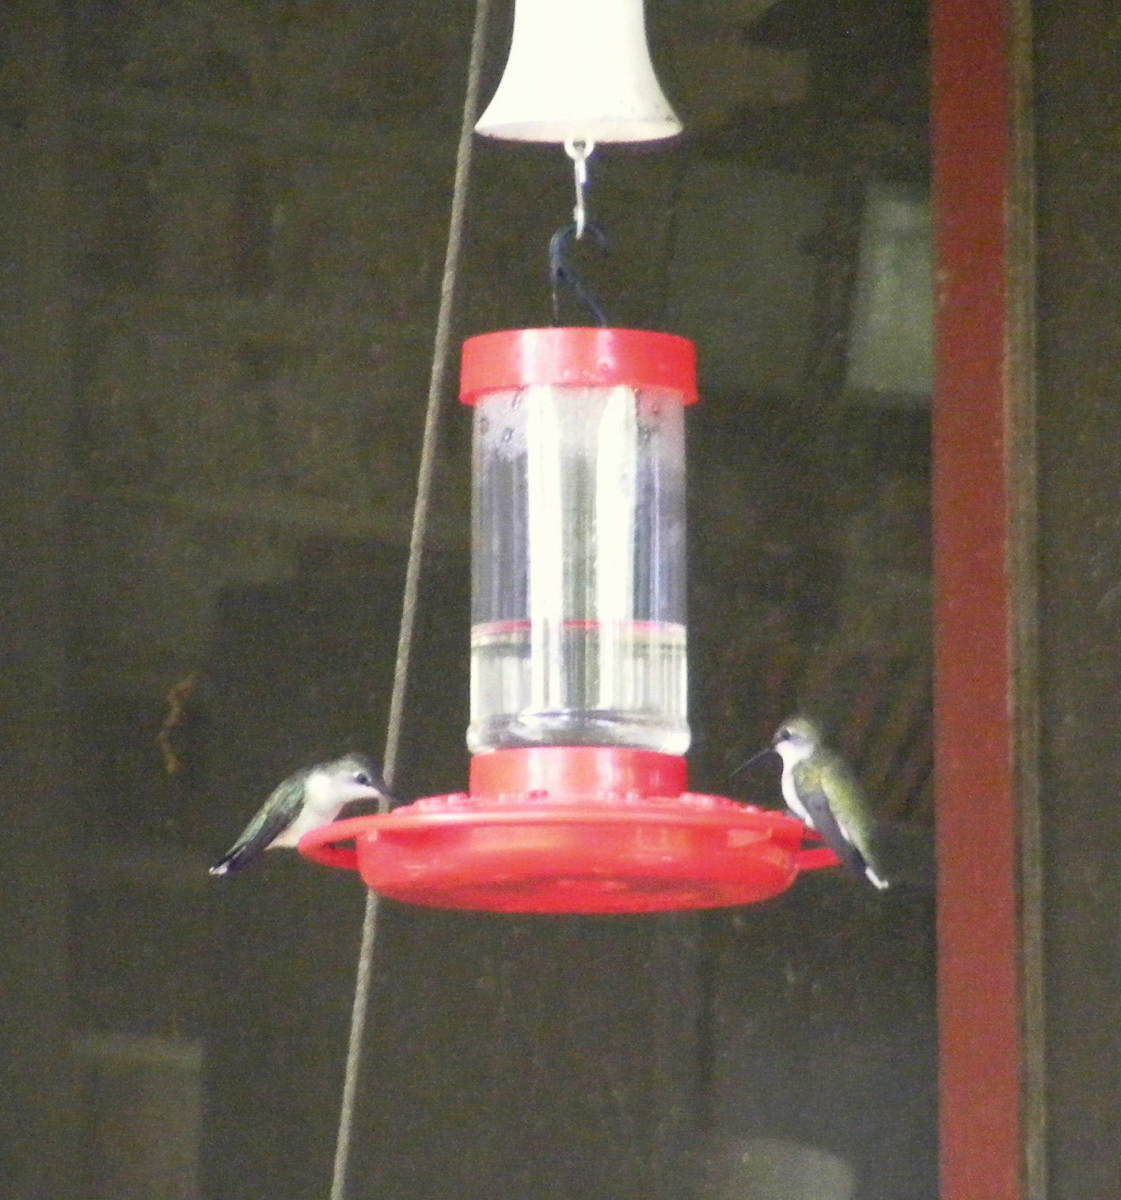 This article will break down all the information you need to know to set up a hummingbird feeder in your own garden.